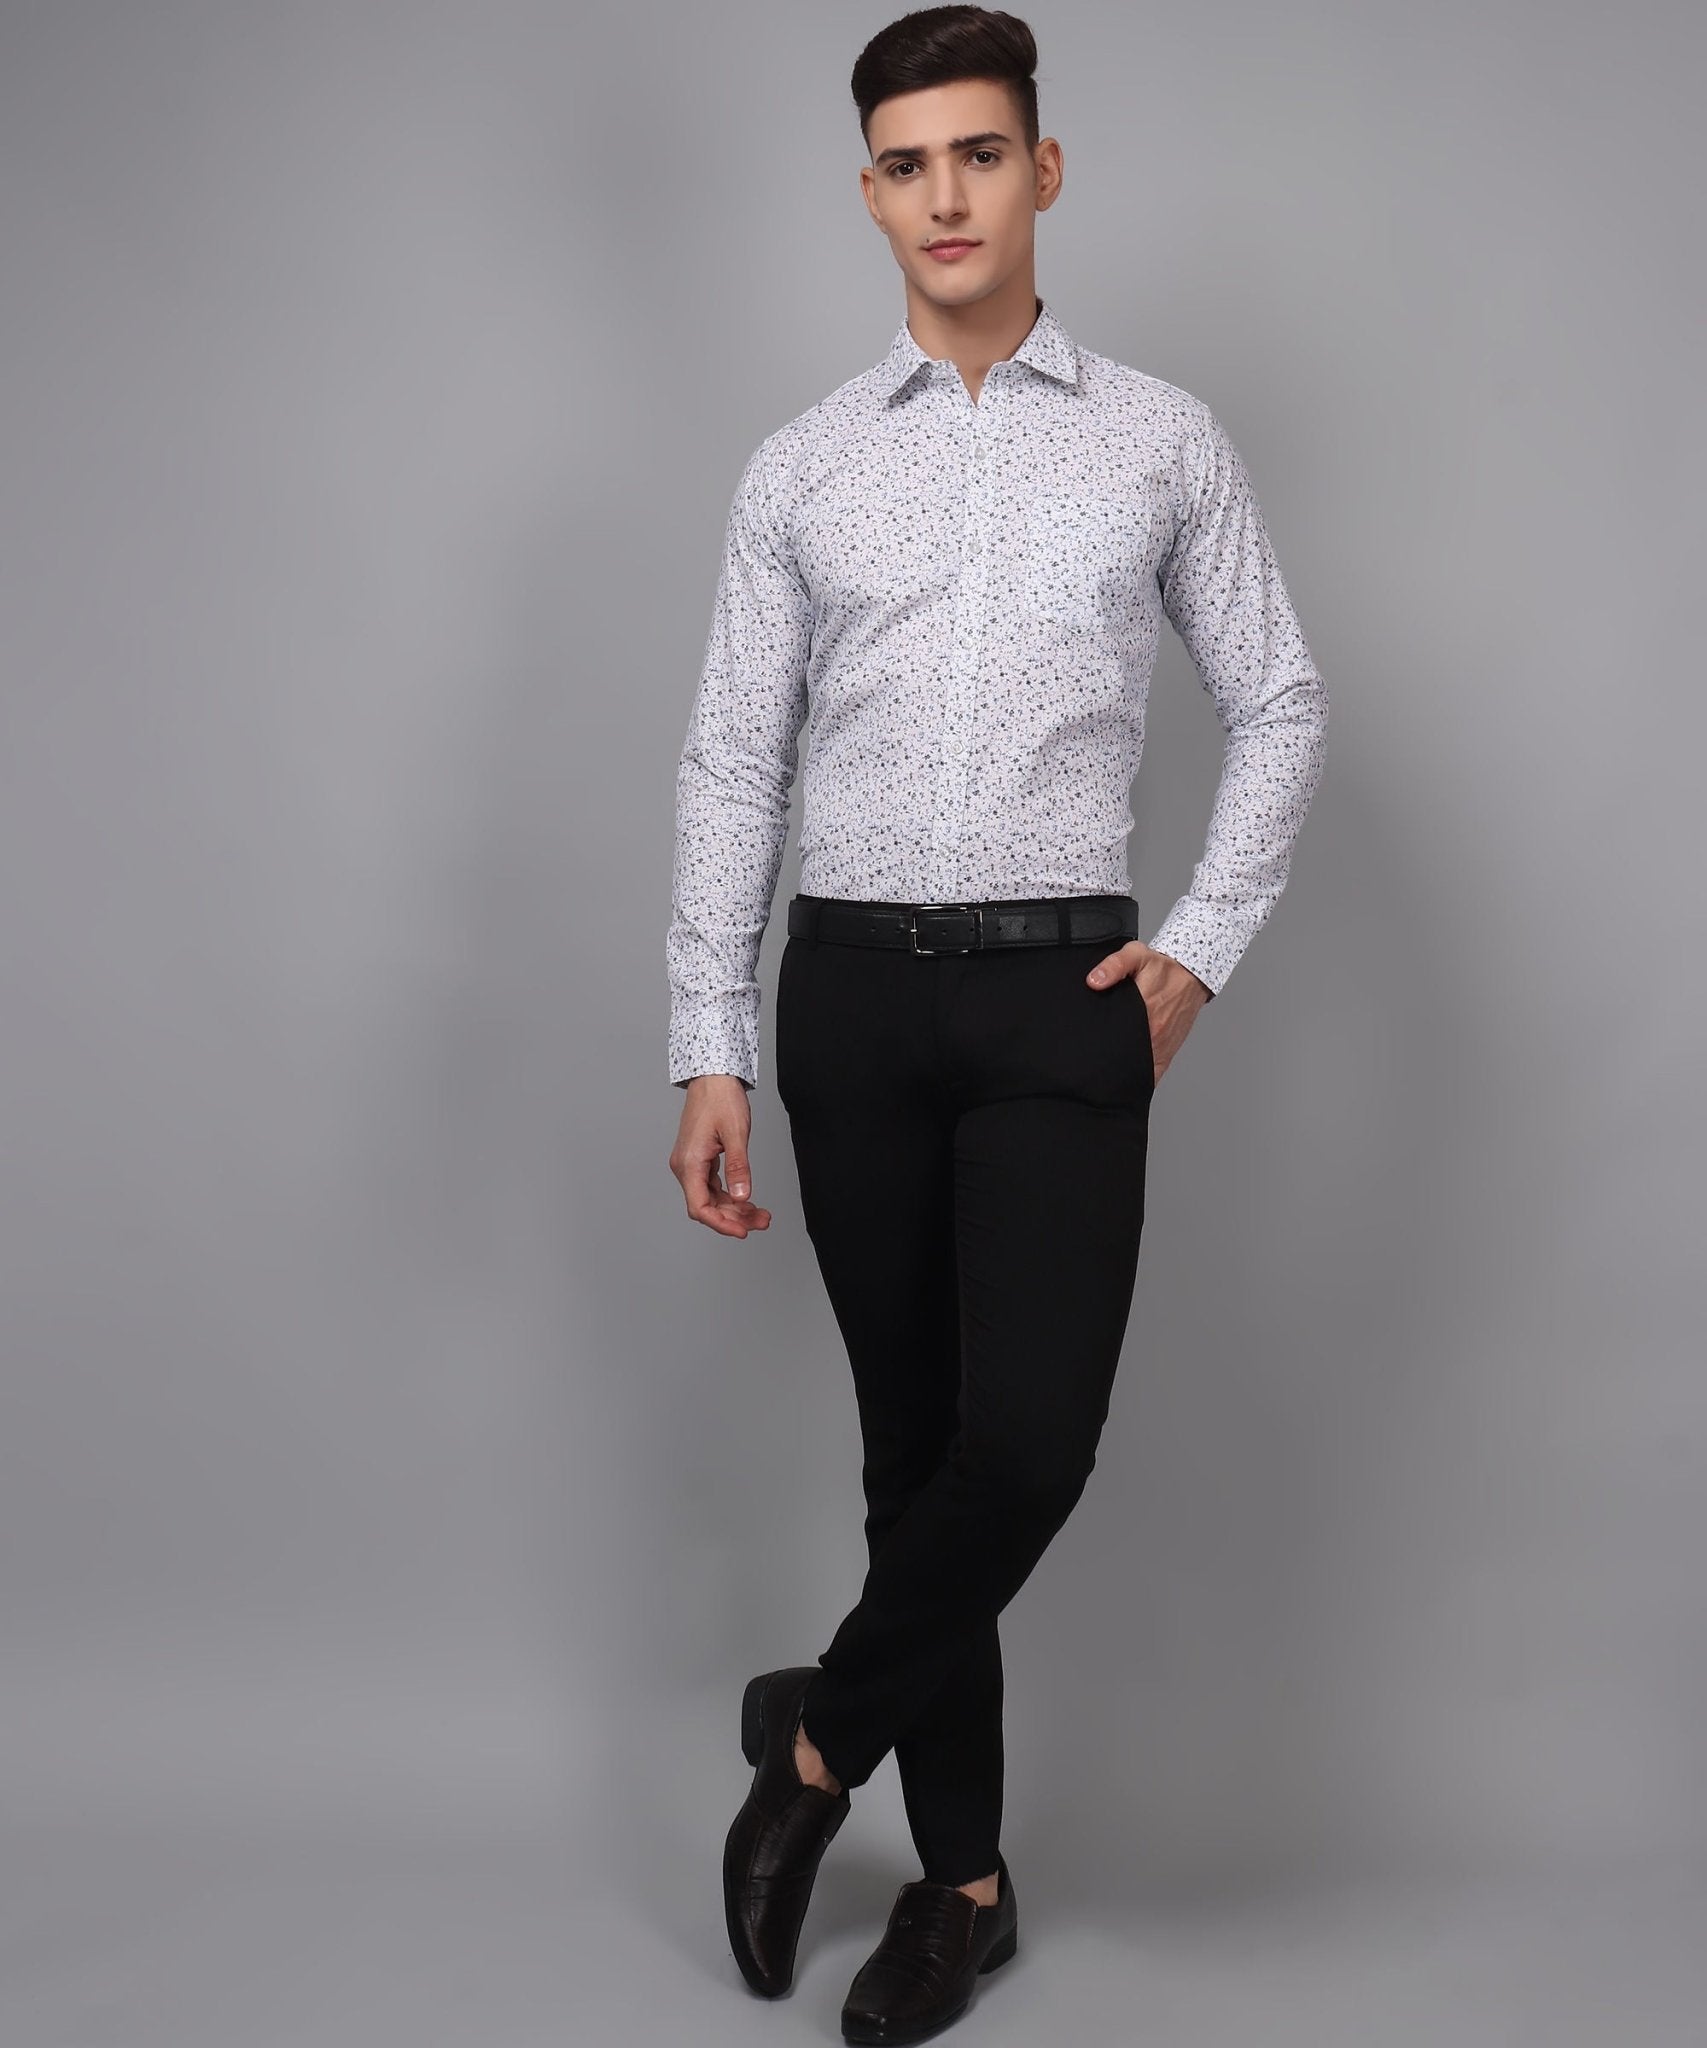 Luxurious Edition TryBuy Premium Cotton Linen Printed Casual/Formal Shirt for Men - TryBuy® USA🇺🇸